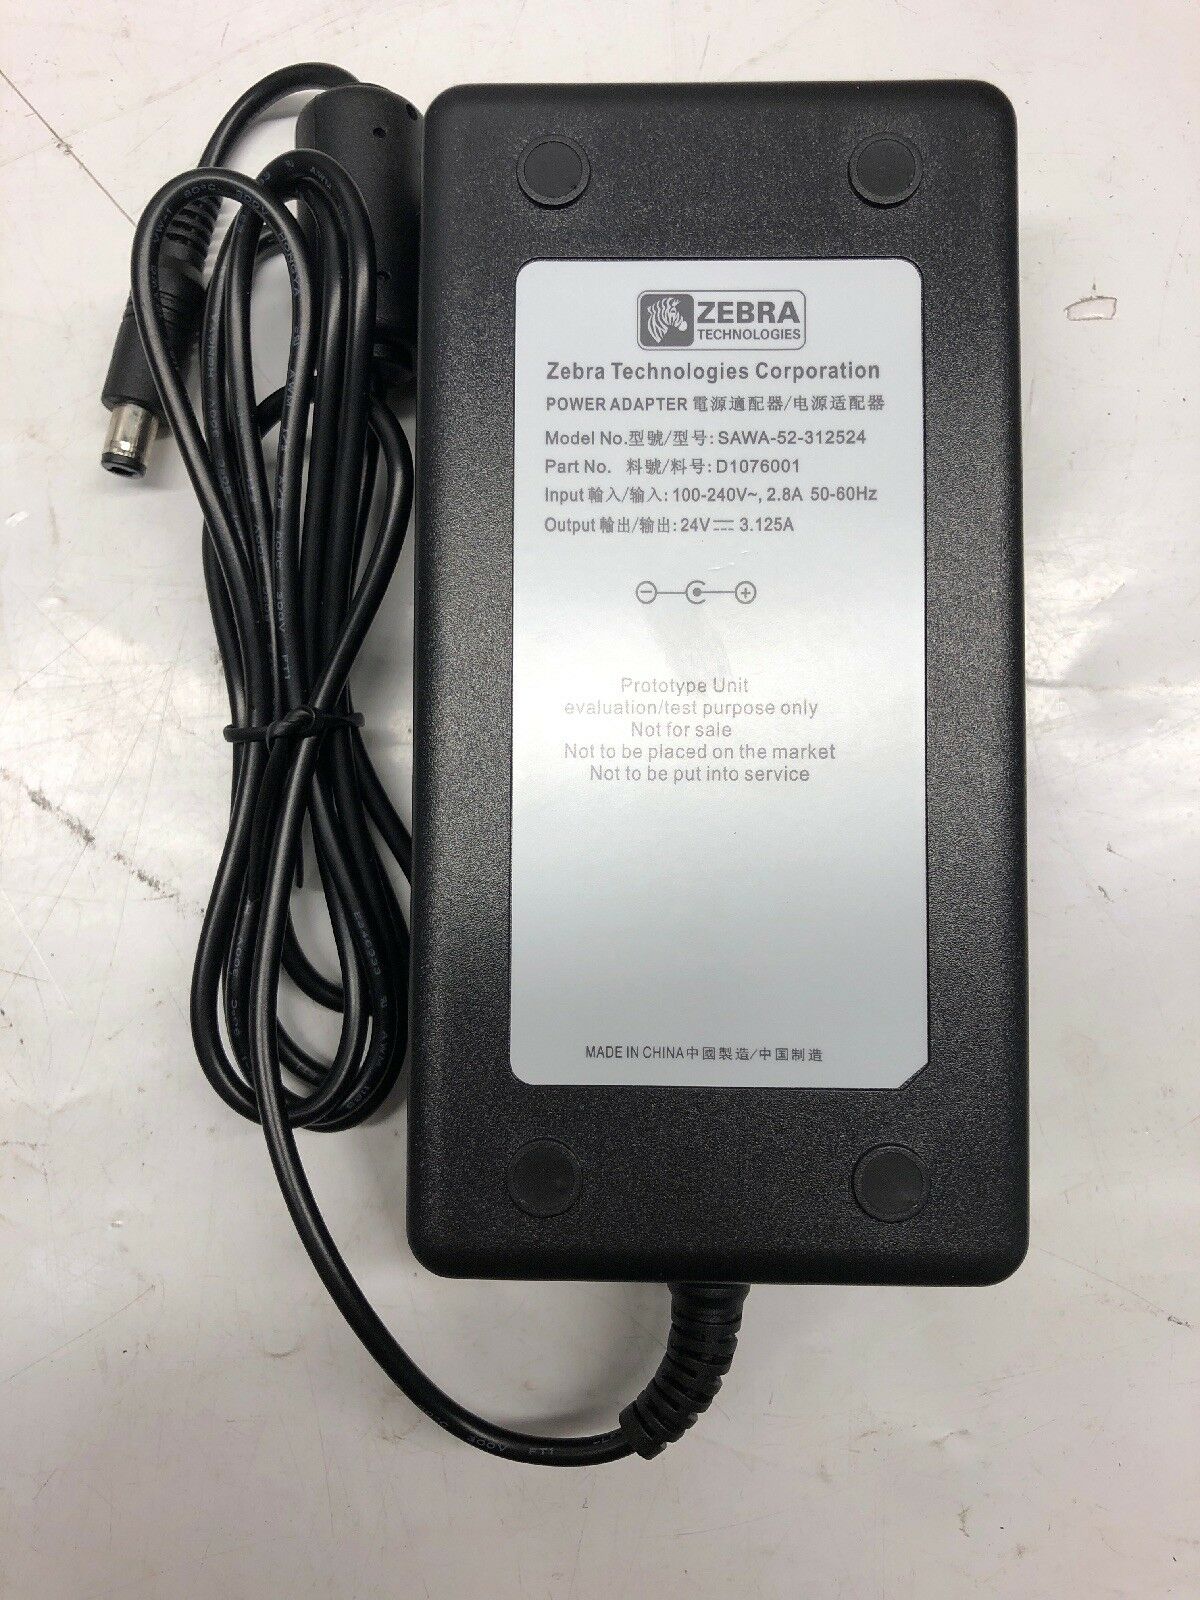 Zebra Thermal Printer Power Supply Adapter SAWA-52-312524 (output 24V-3.125A) Country/Region of Manufacture: China Cus